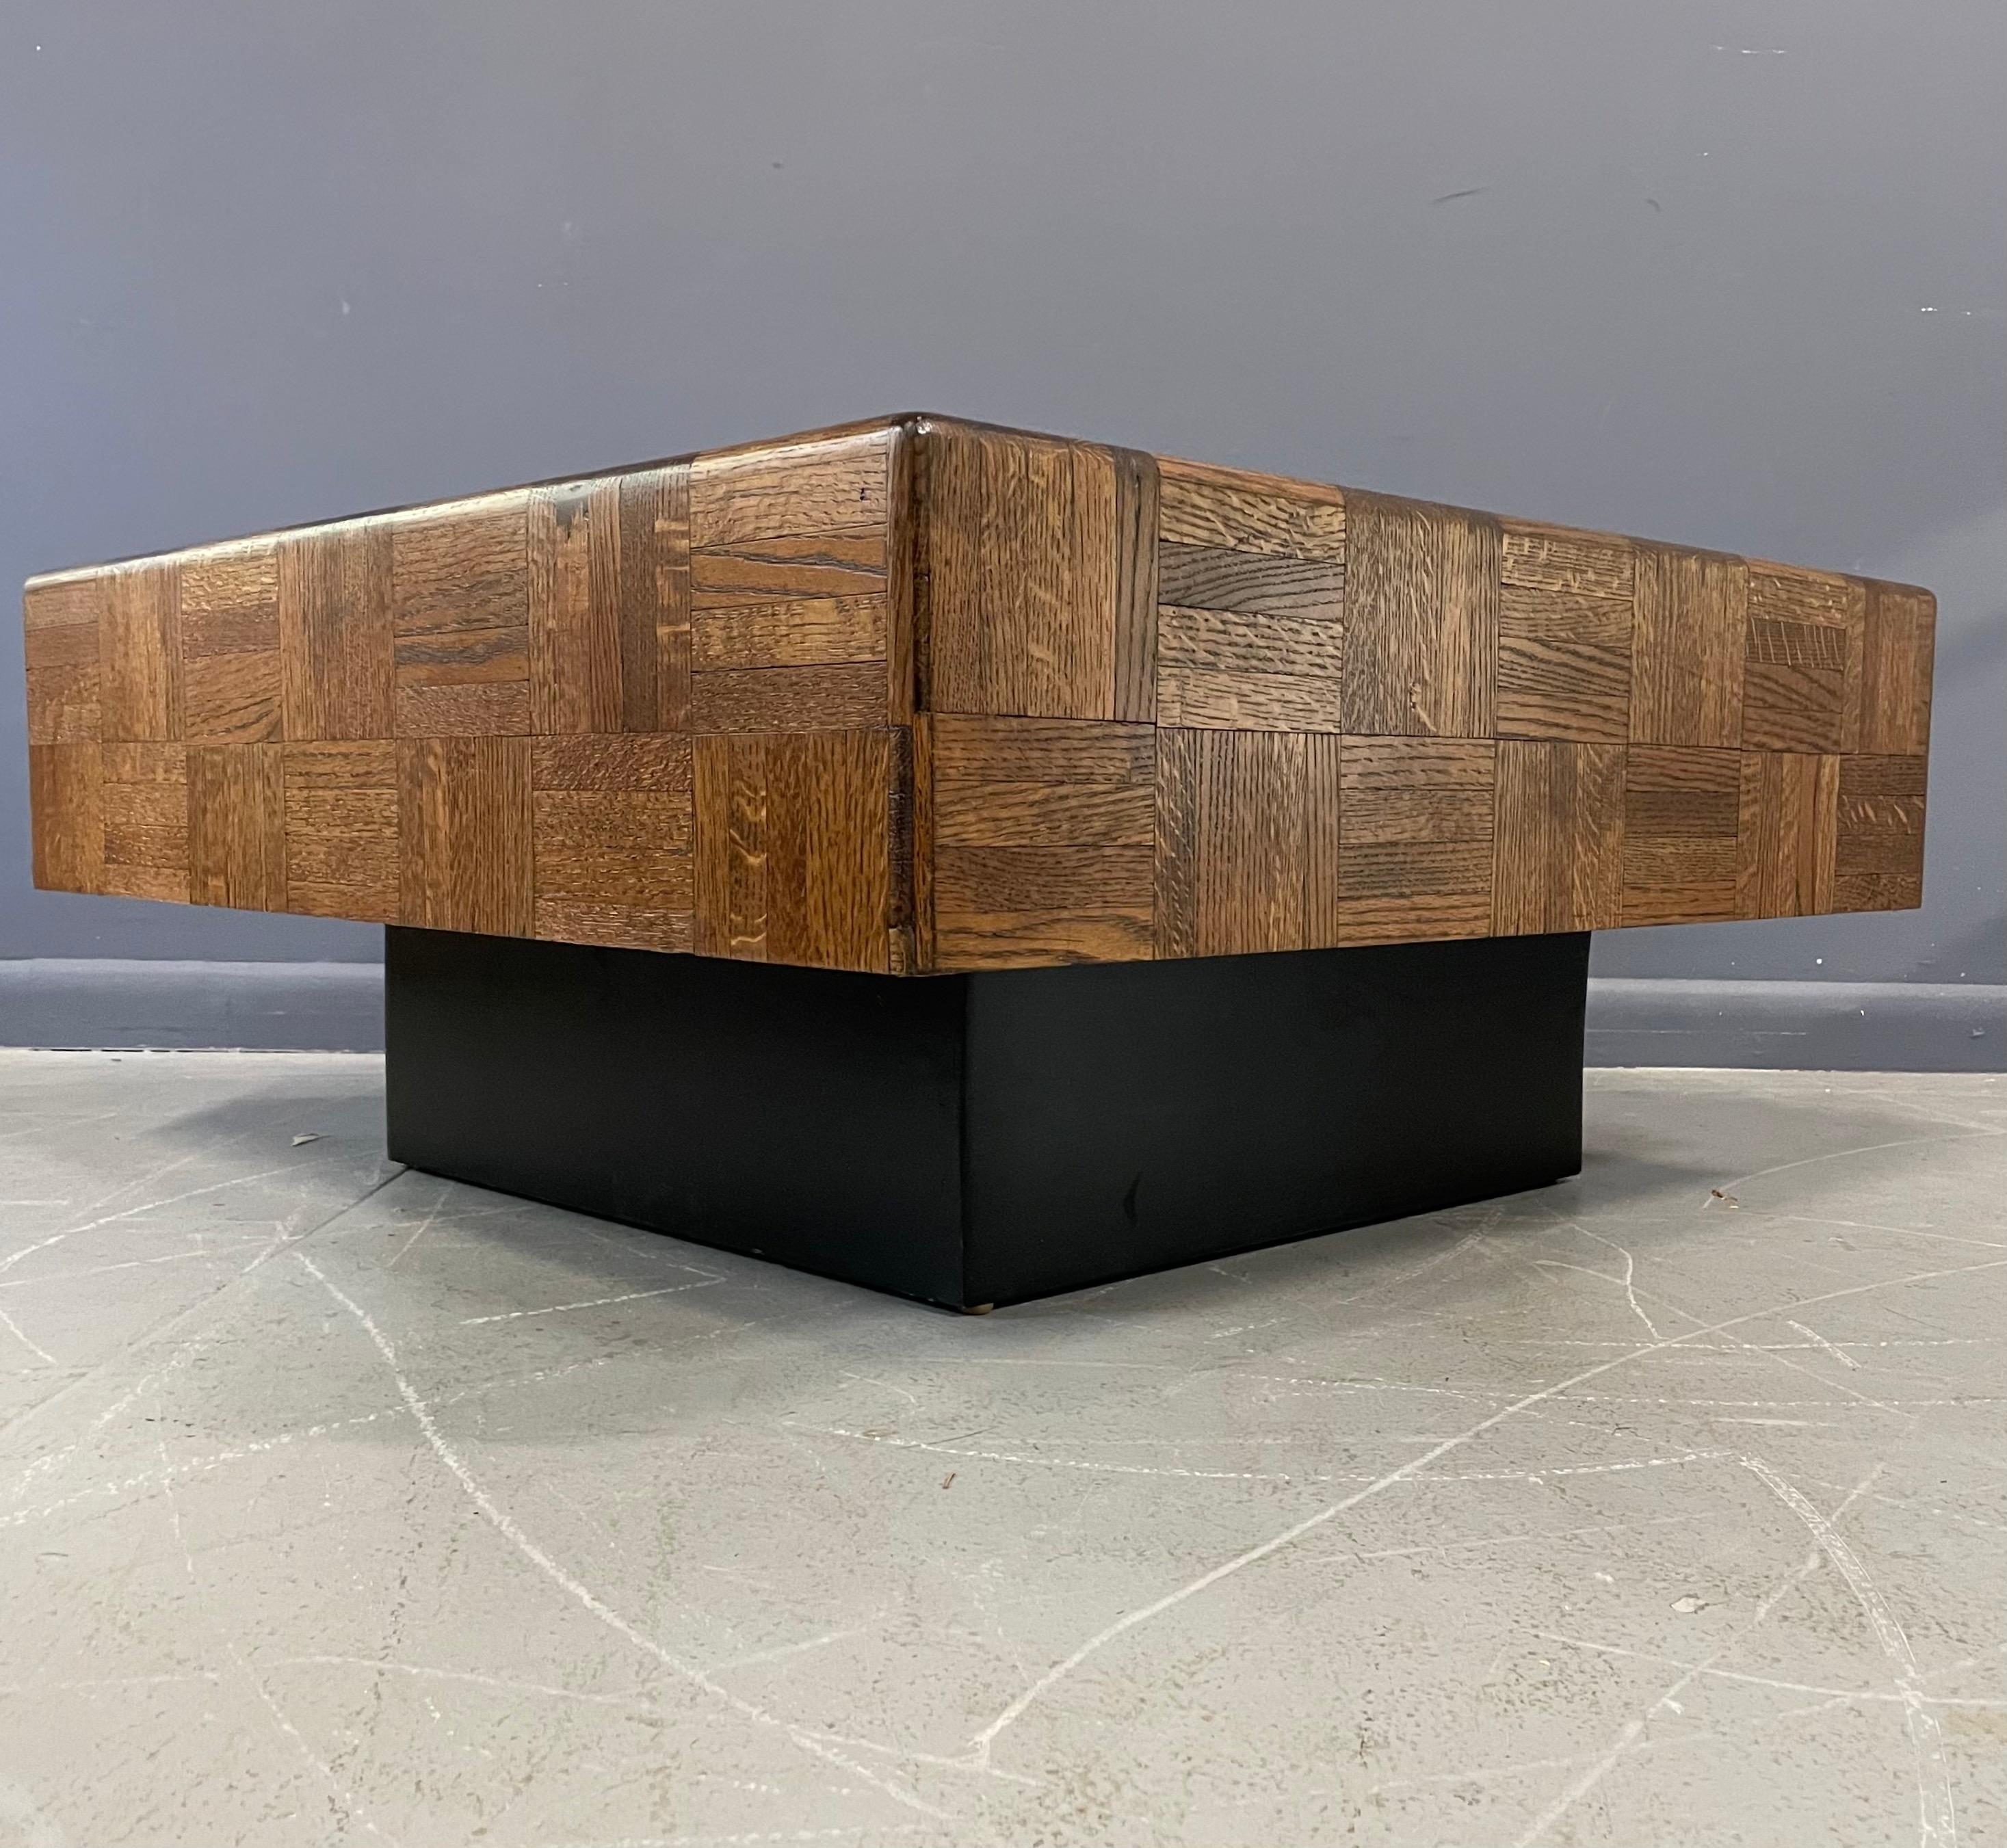 Refinished coffee table with oak parquet in a coffee colored stain on a recessed black plinth base that gives the impression the table is floating.